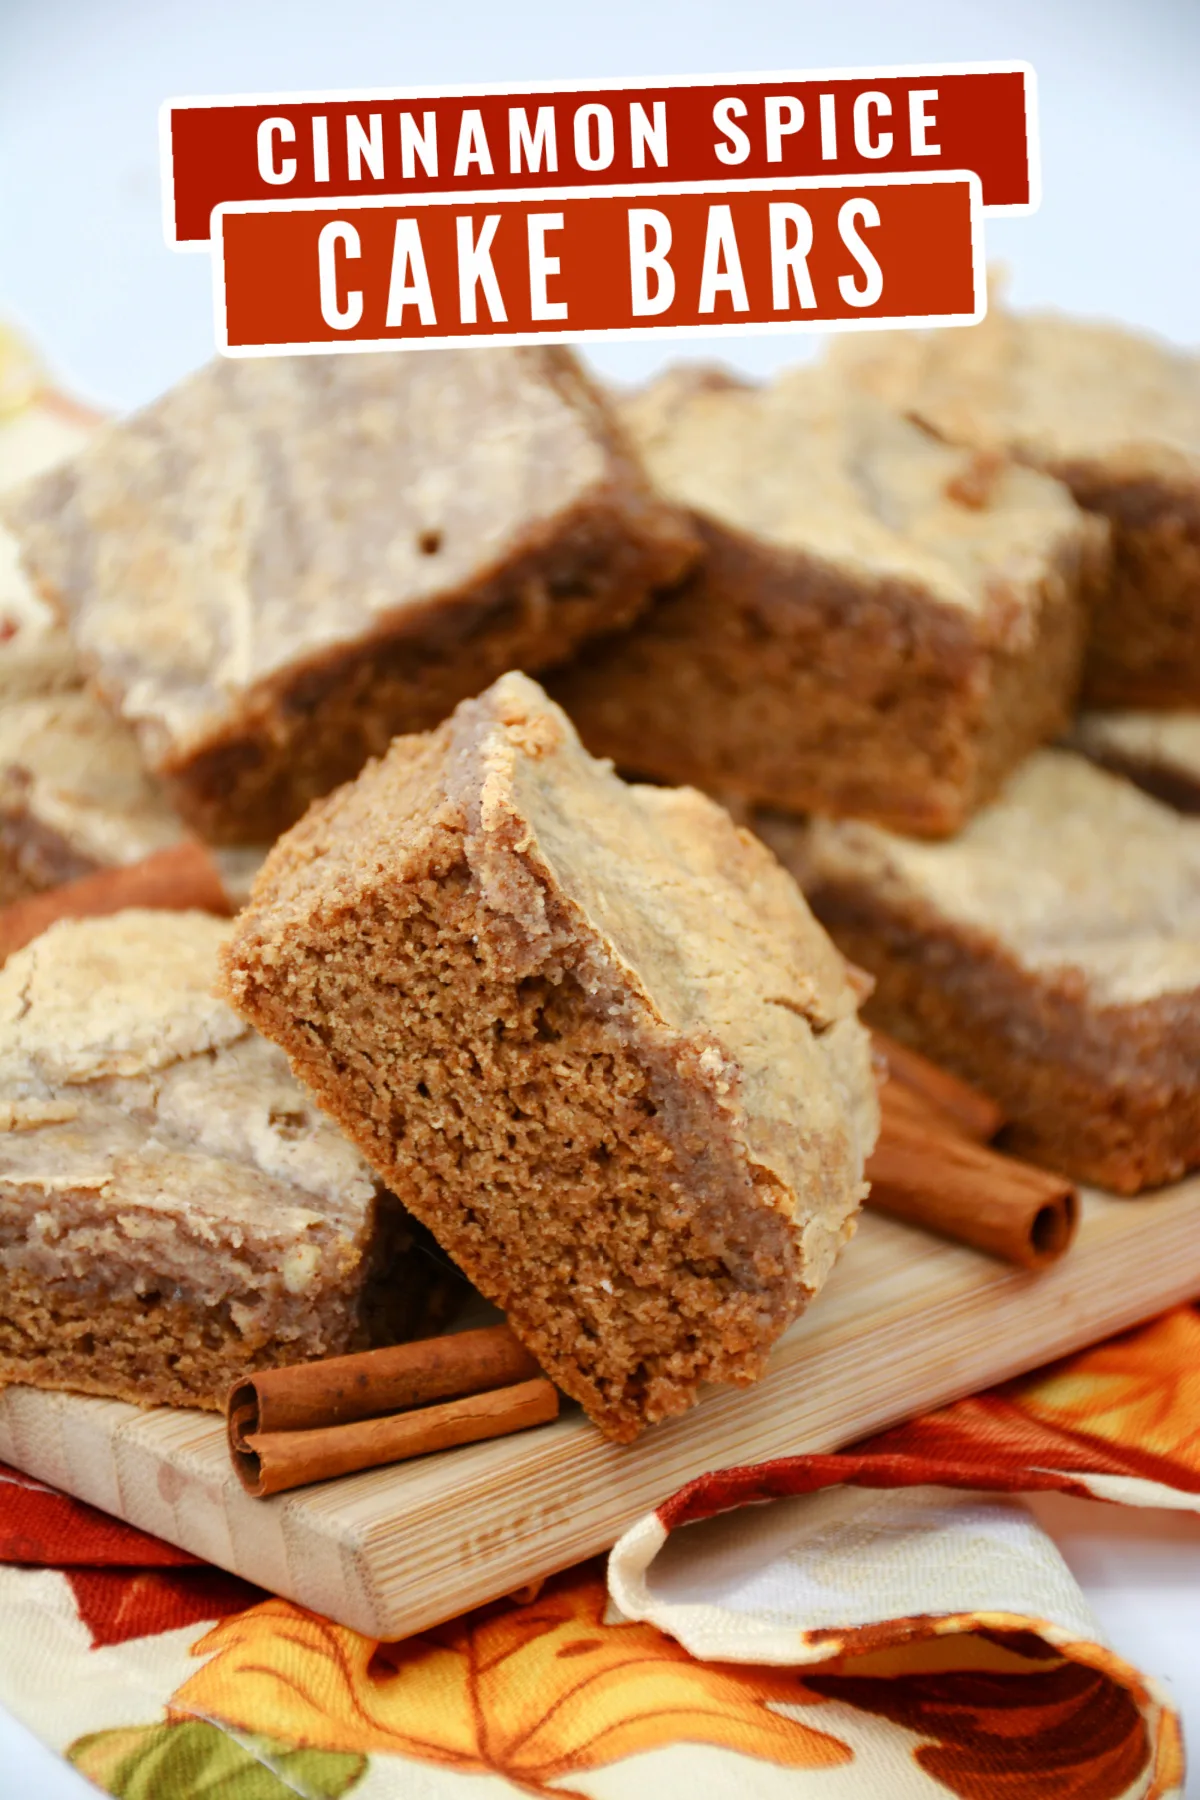 This delicious cake mix hack for cinnamon spice cake bars is so quick and easy, they are sure to be your new favourite fall dessert.